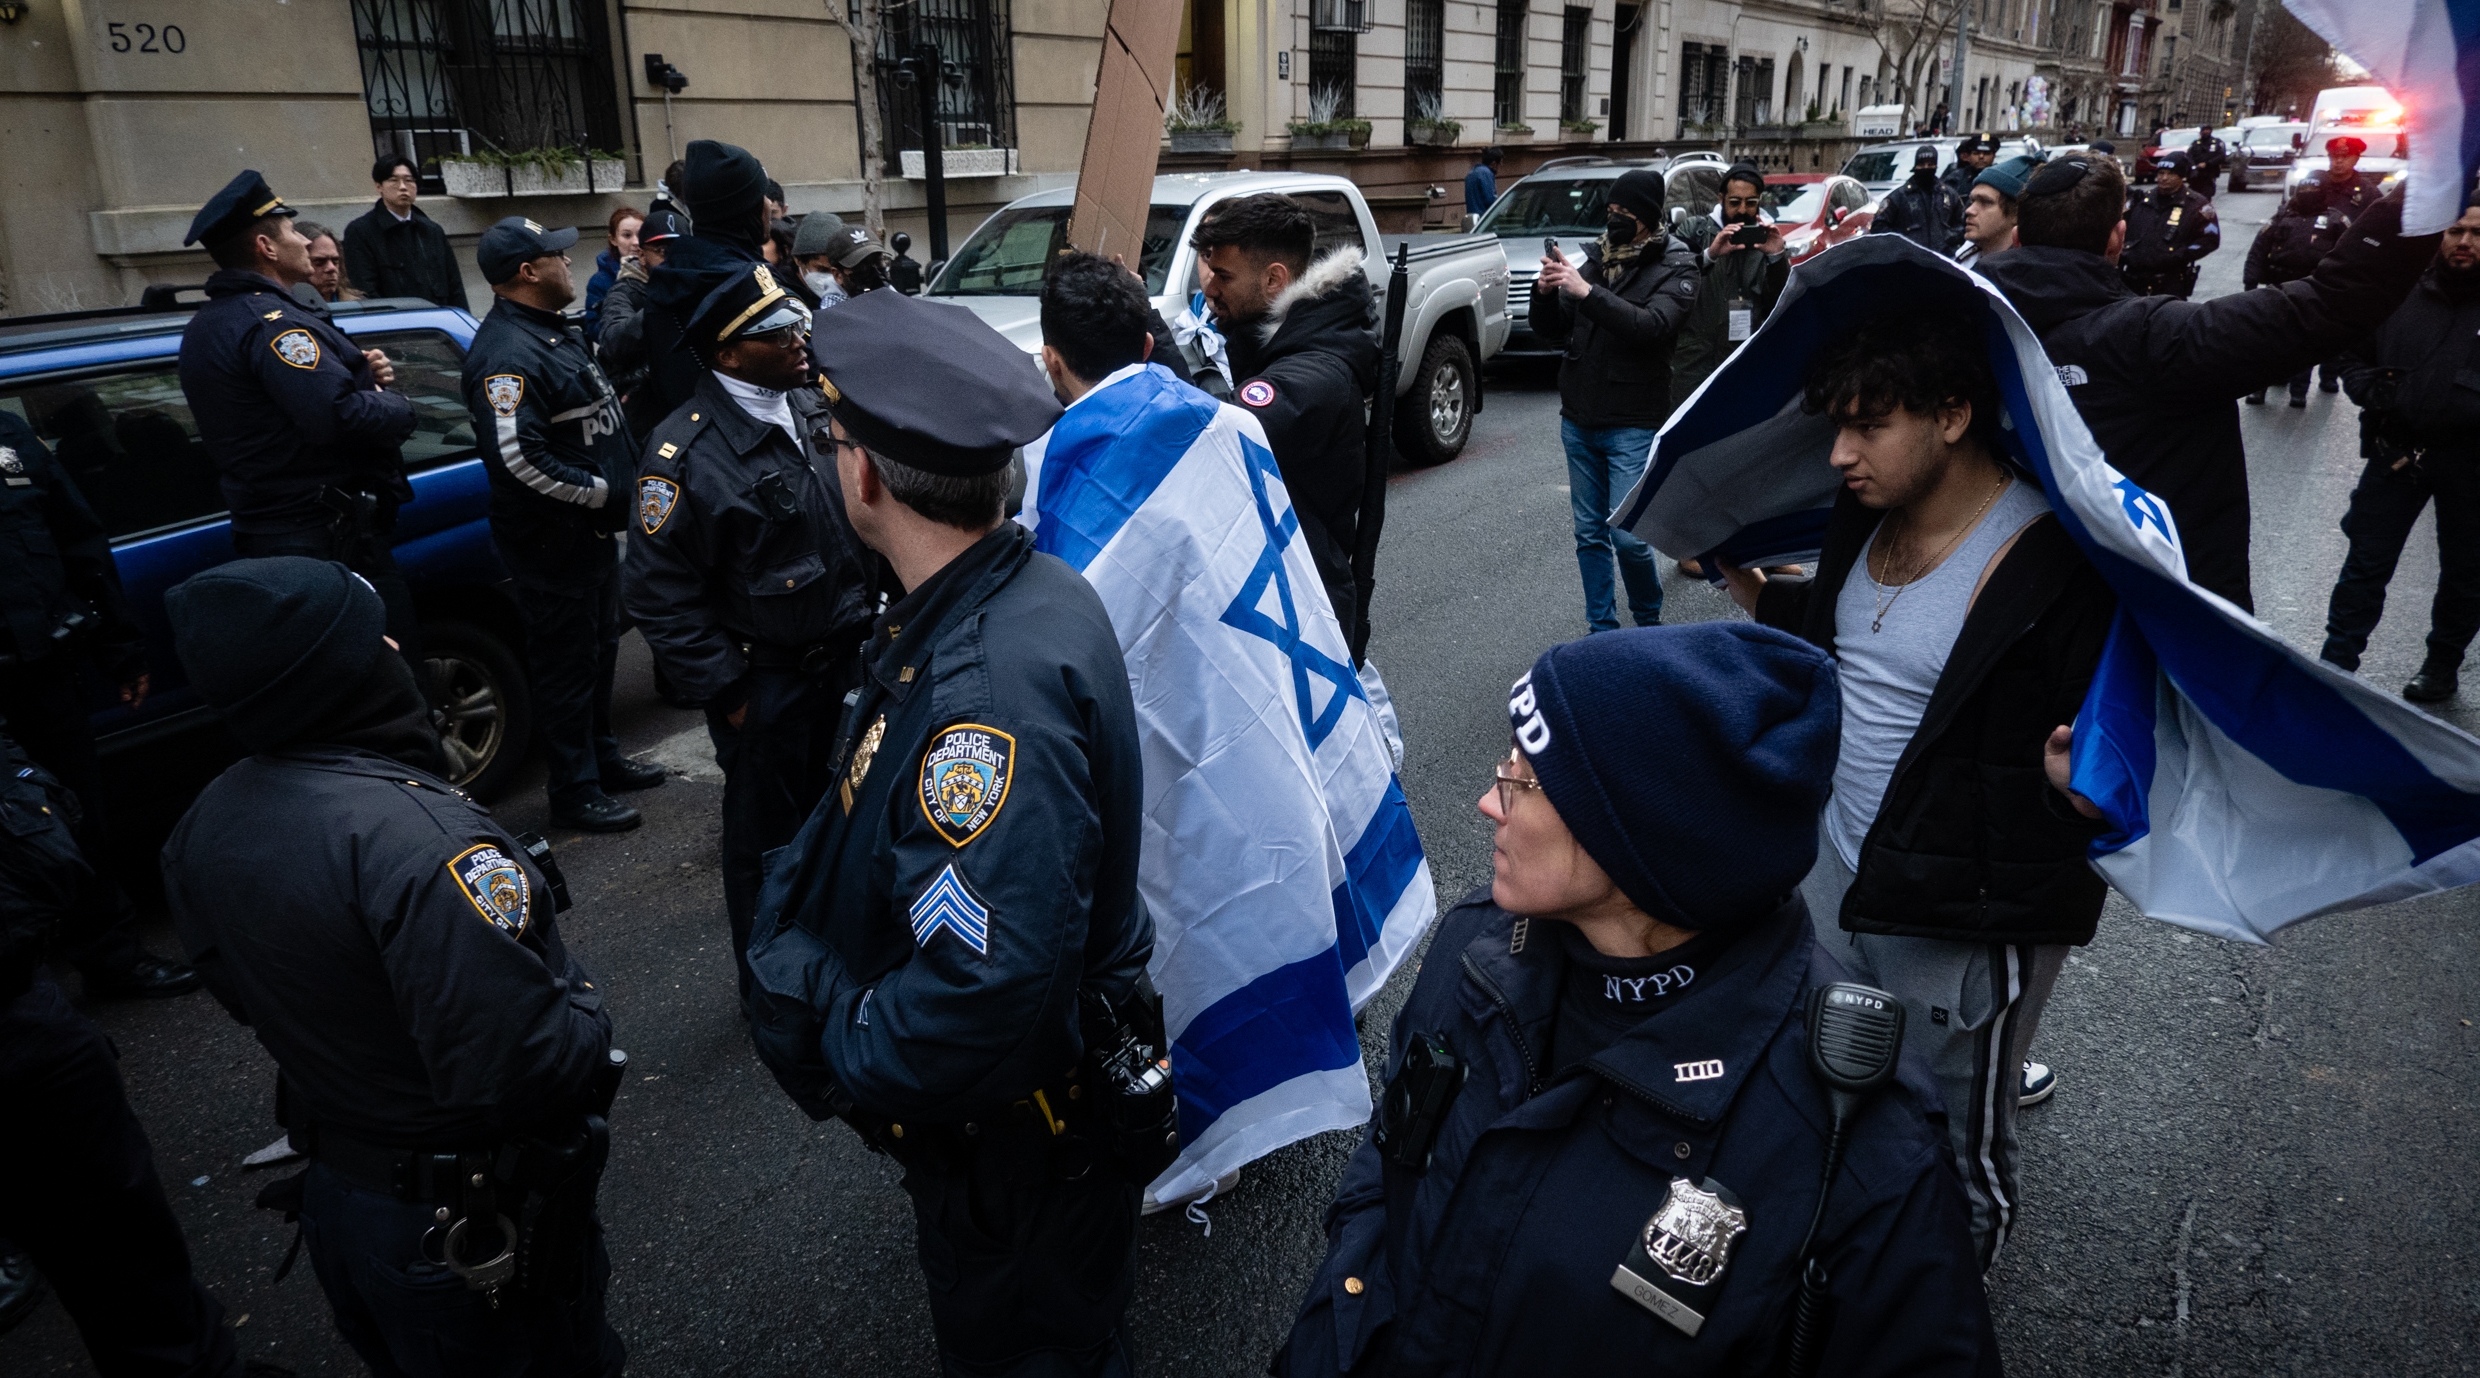 ADL says antisemitic incidents more than doubled last year, driven by surge after Oct. 7 